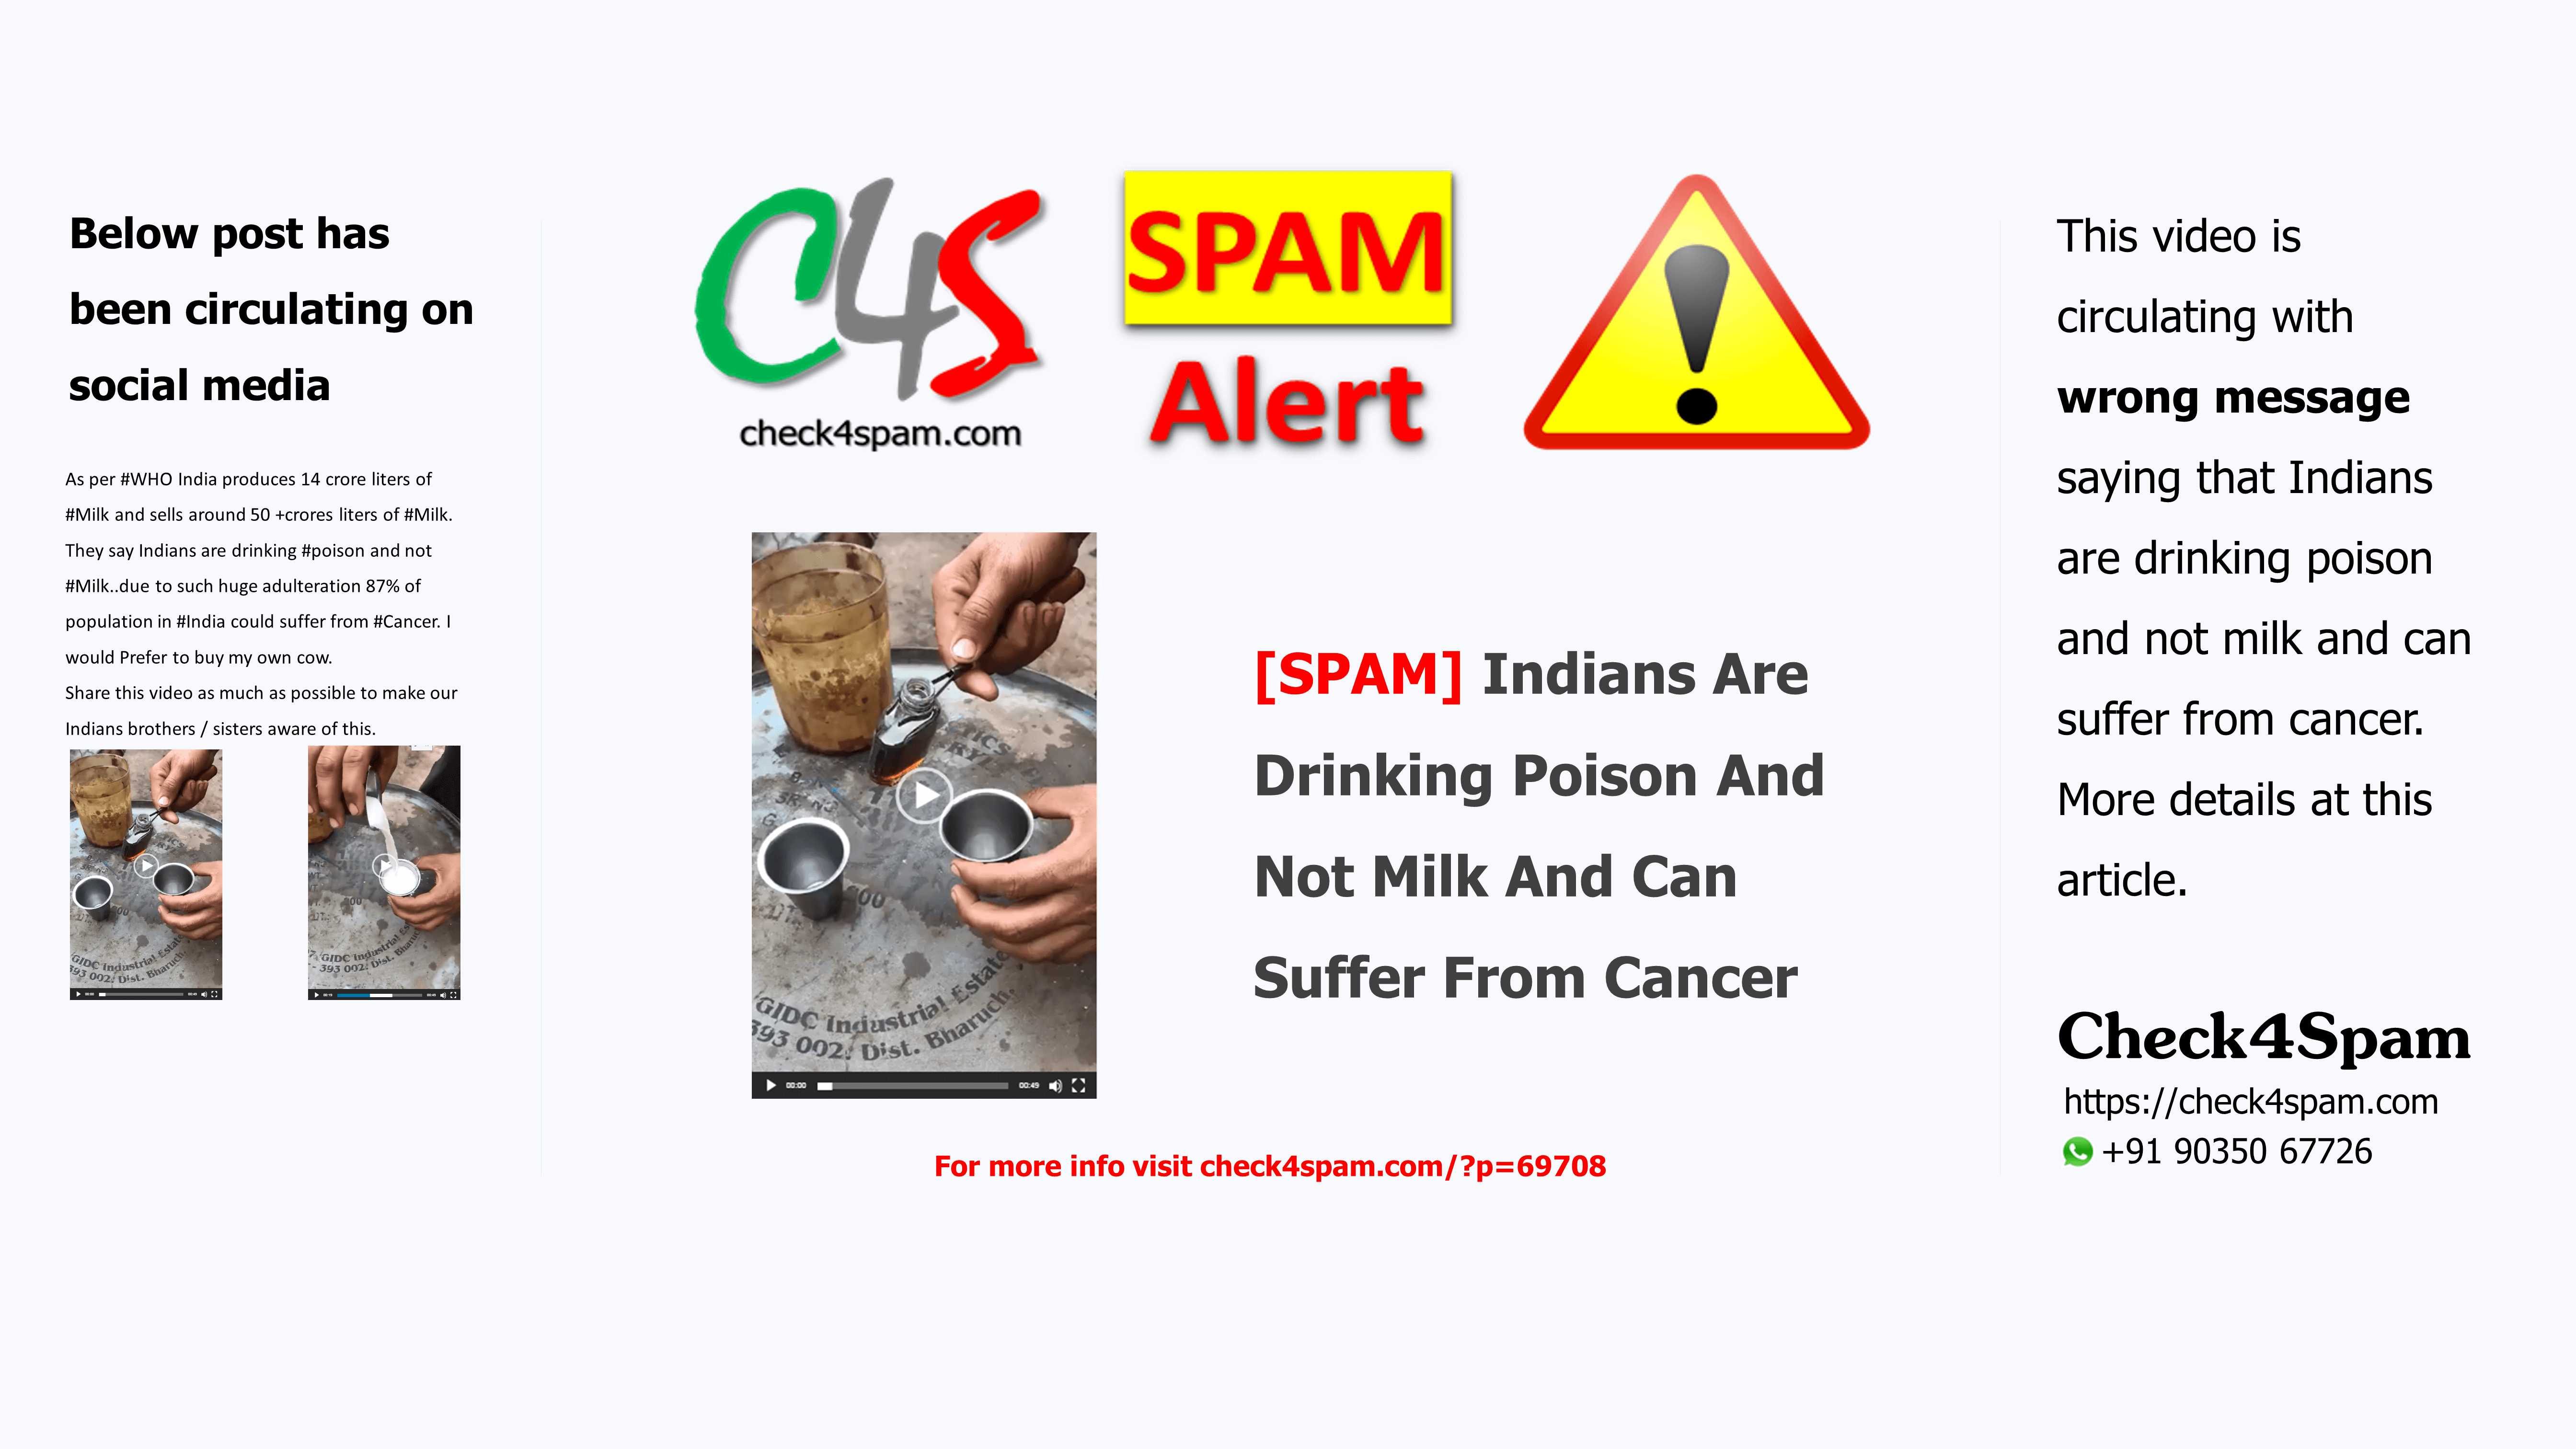 [SPAM] Indians Are Drinking Poison And Not Milk And Can Suffer From Cancer